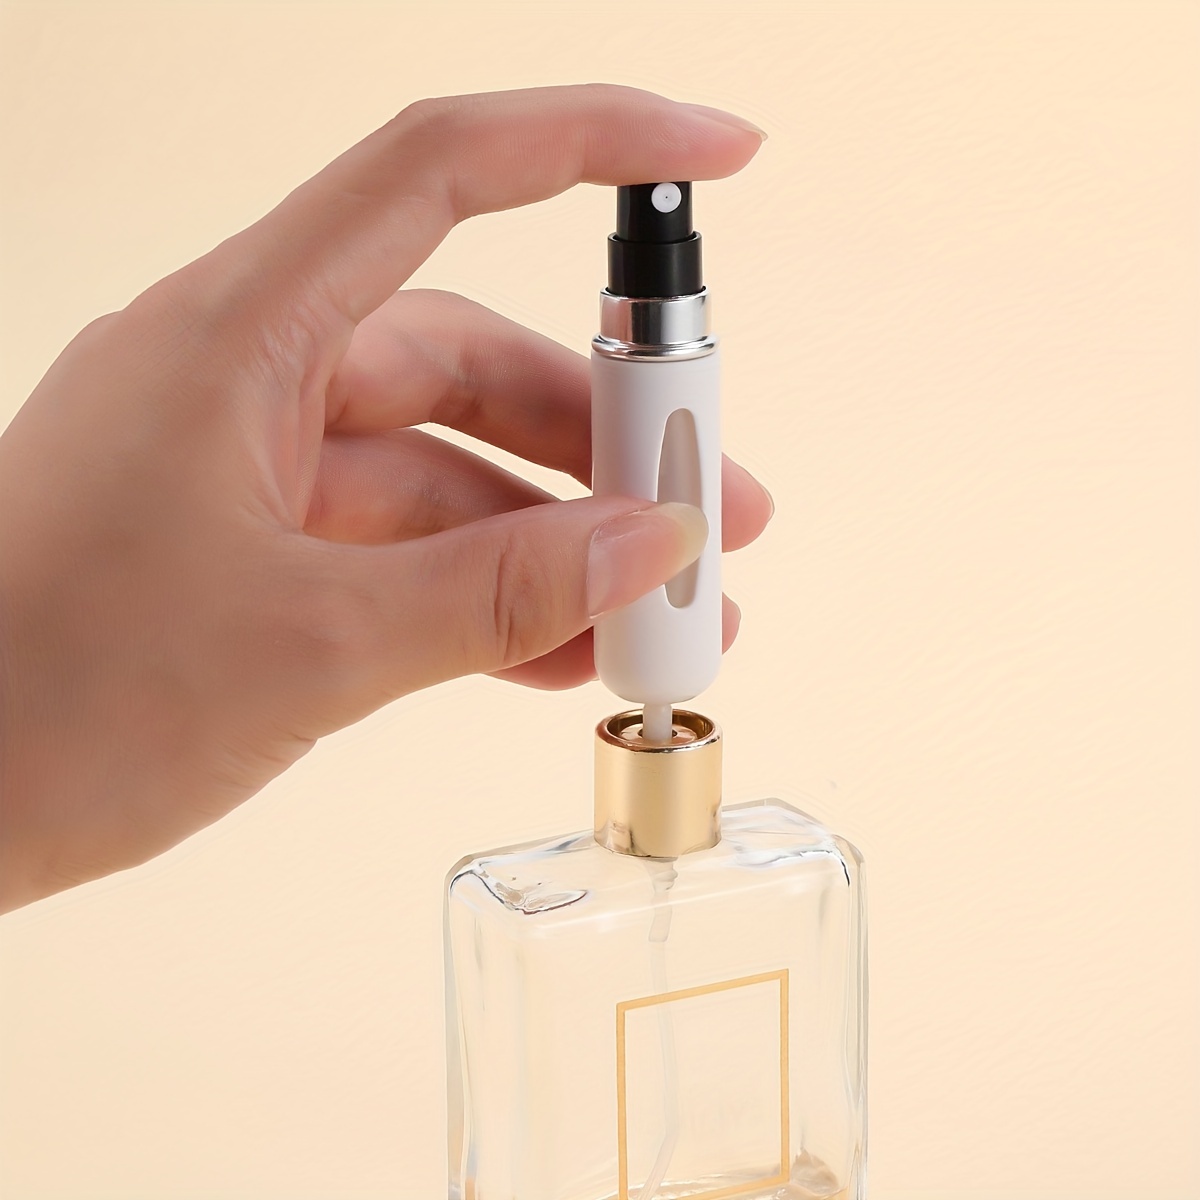 

1pc 5ml Perfume Atomizer Fine Mist Spray Bottle Empty Refillable Makeup Sample Container Portable For Travel Party & Outgoing